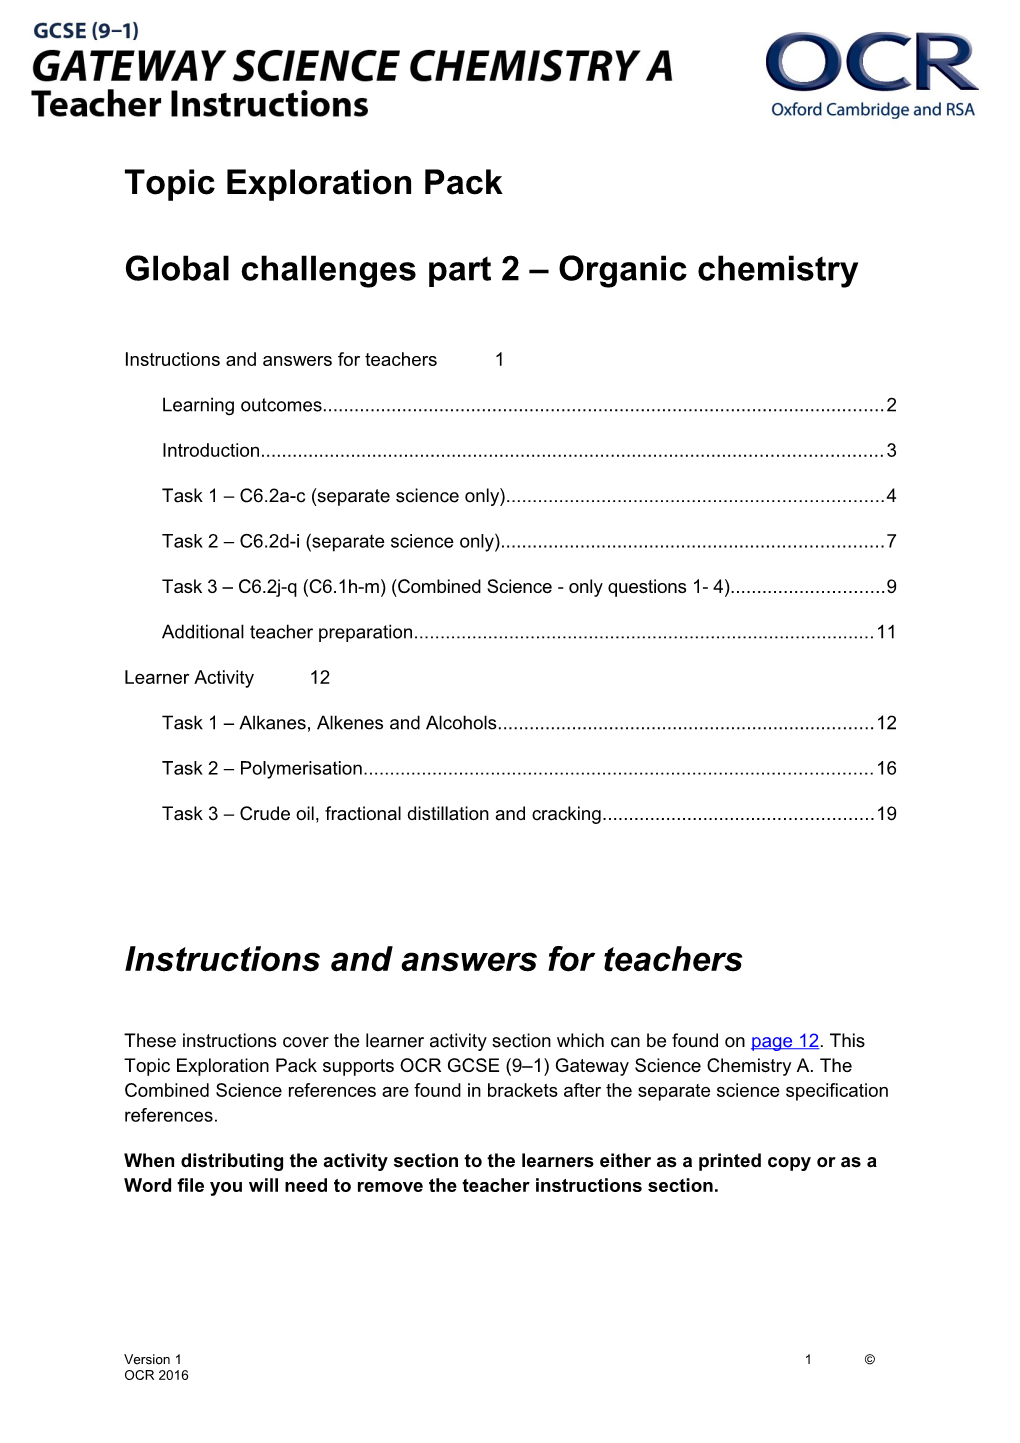 OCR GCSE (9-1) Gateway Science Chemistry a Topic Exploration Pack (Global Challenges - Part 2)